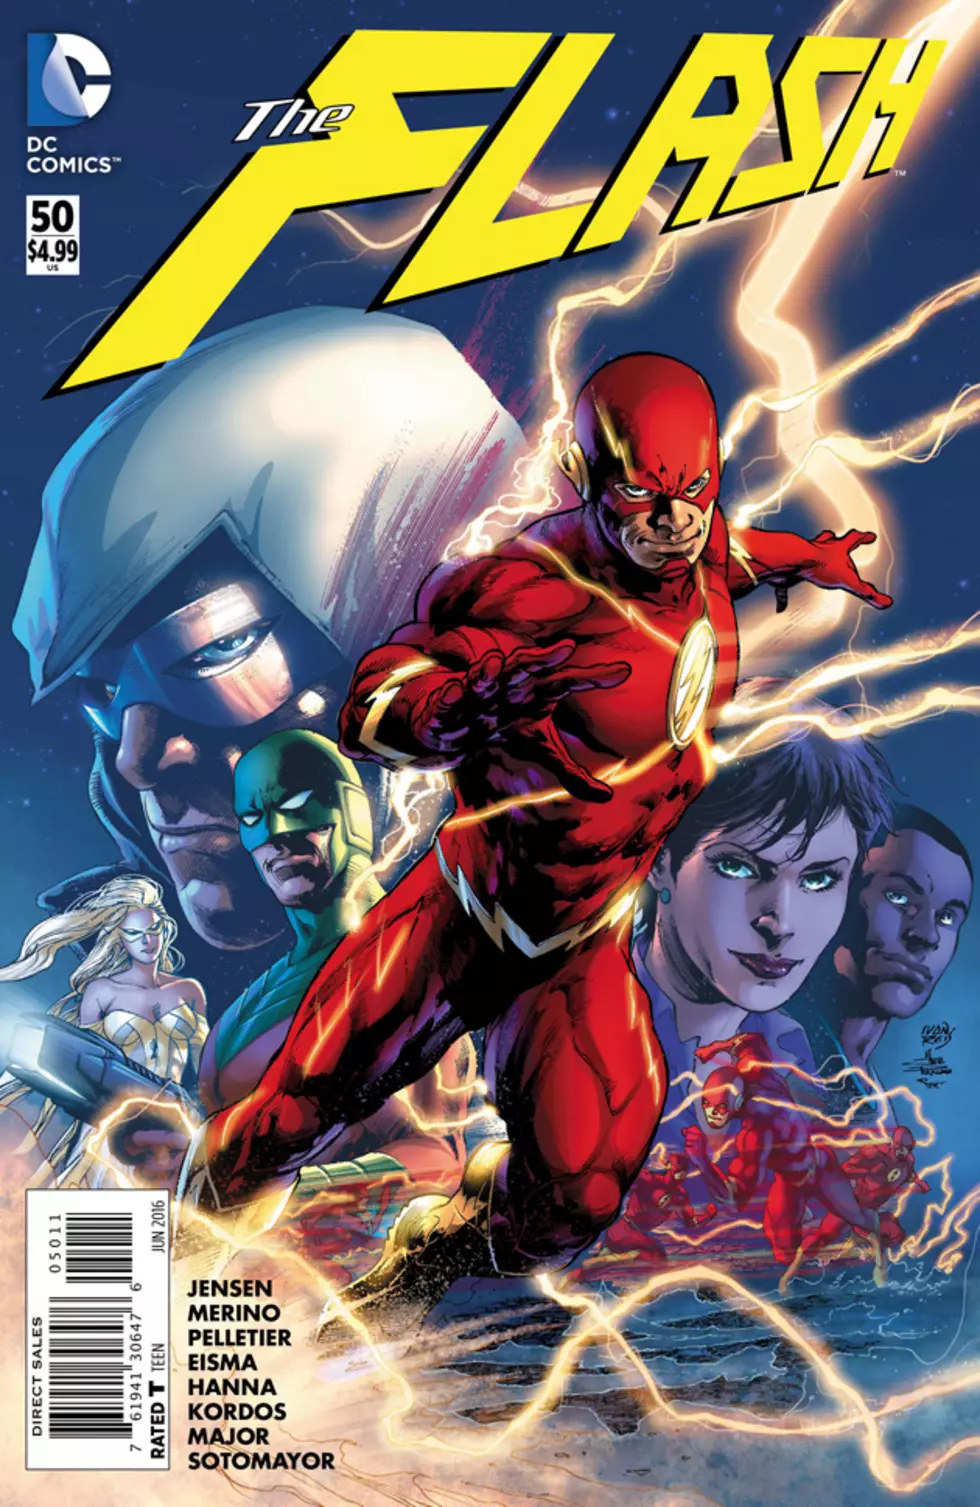 The Flash Goes To Jail, Goes Directly To Jail In &#8216;The Flash&#8217; #50 [Preview]